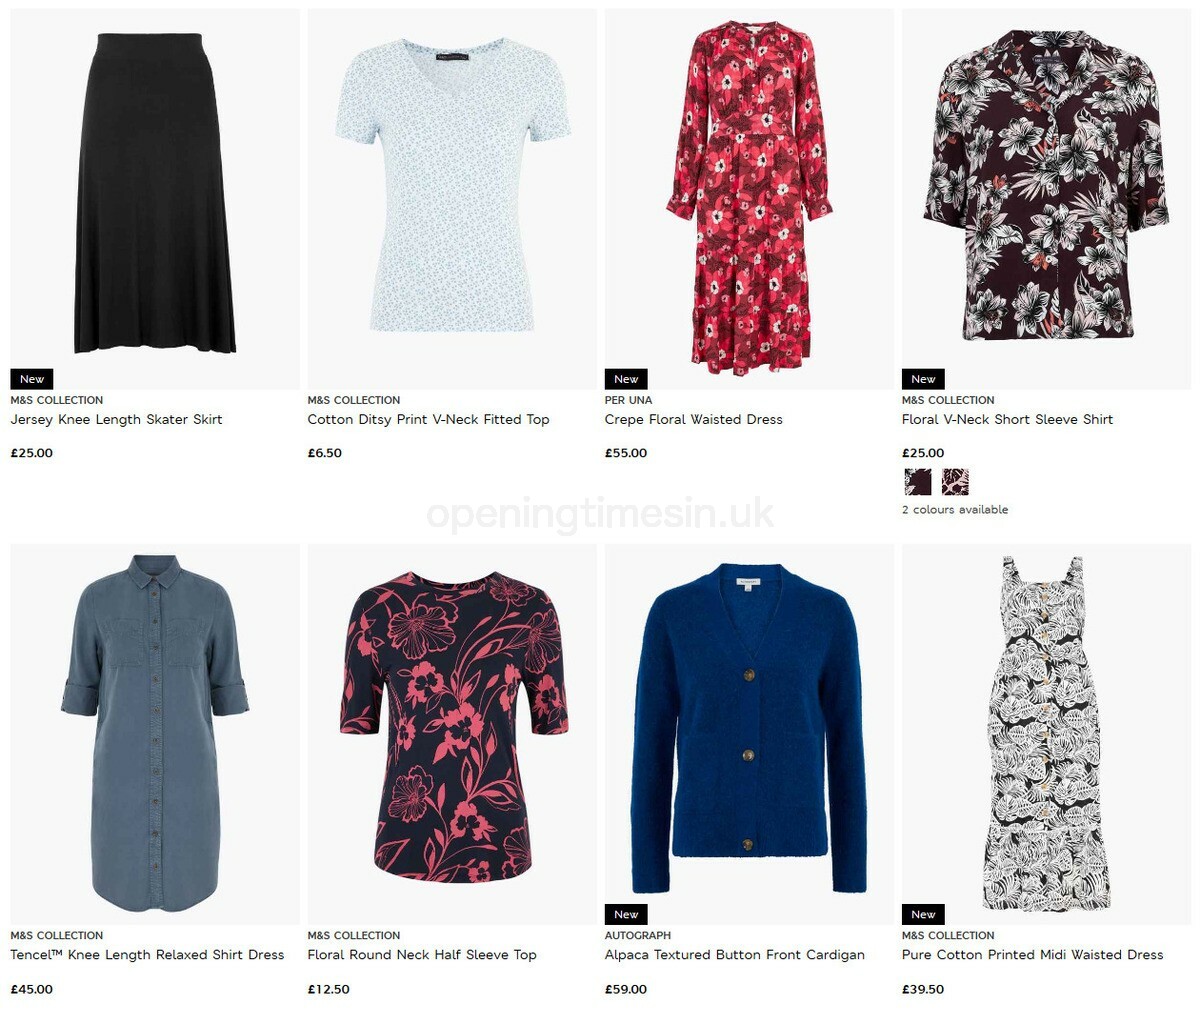 M&S Marks and Spencer Offers from 1 September